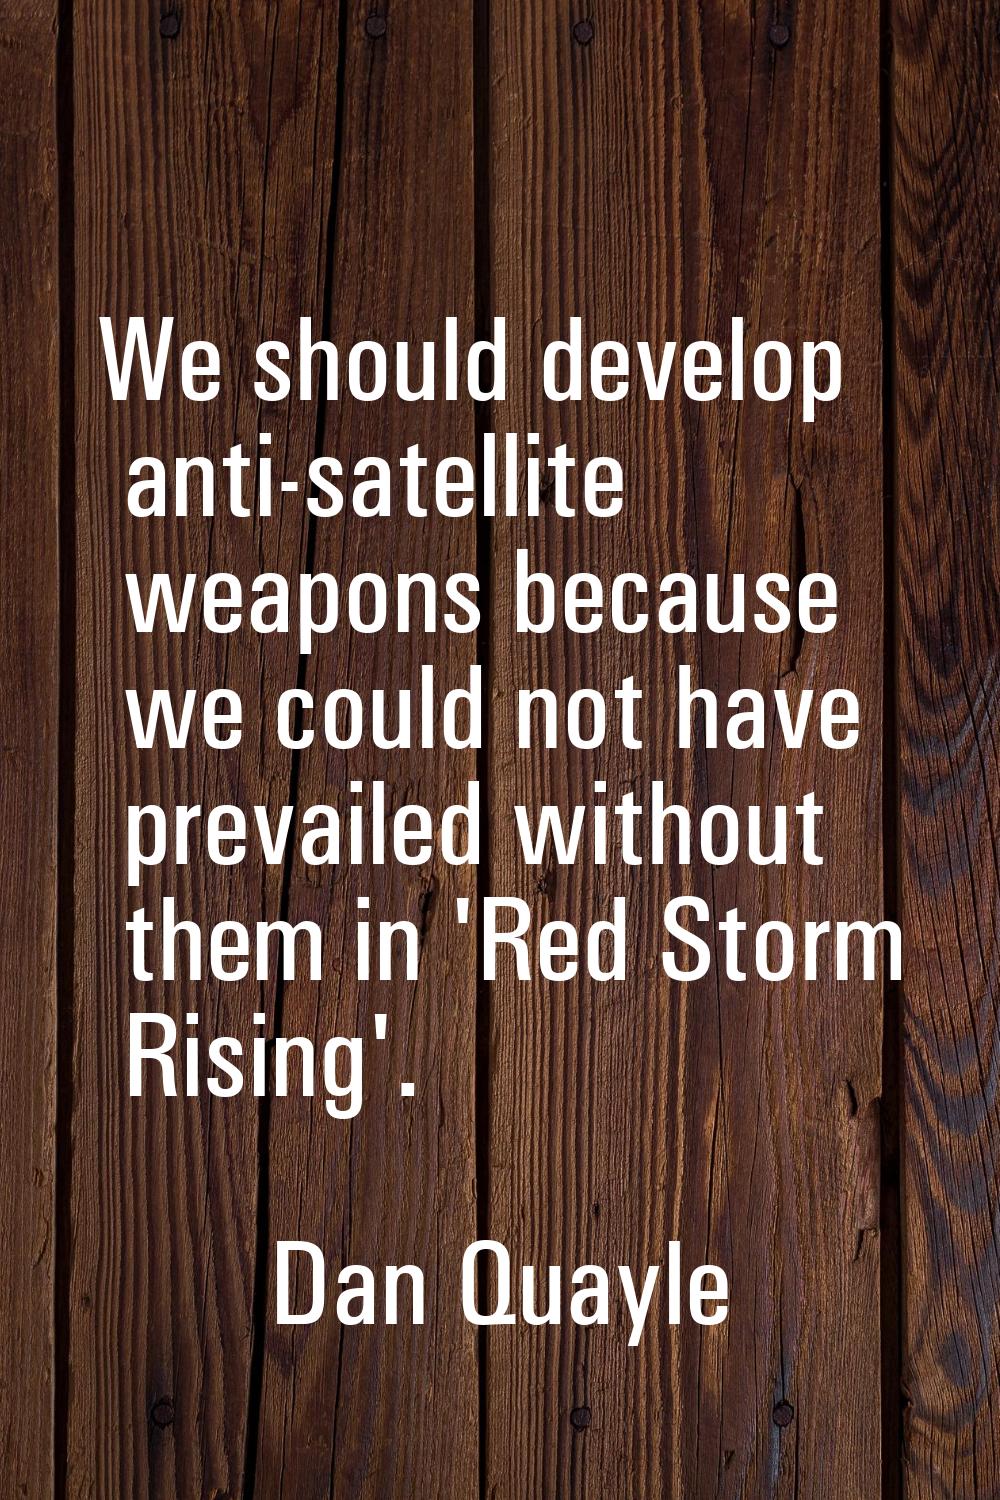 We should develop anti-satellite weapons because we could not have prevailed without them in 'Red S